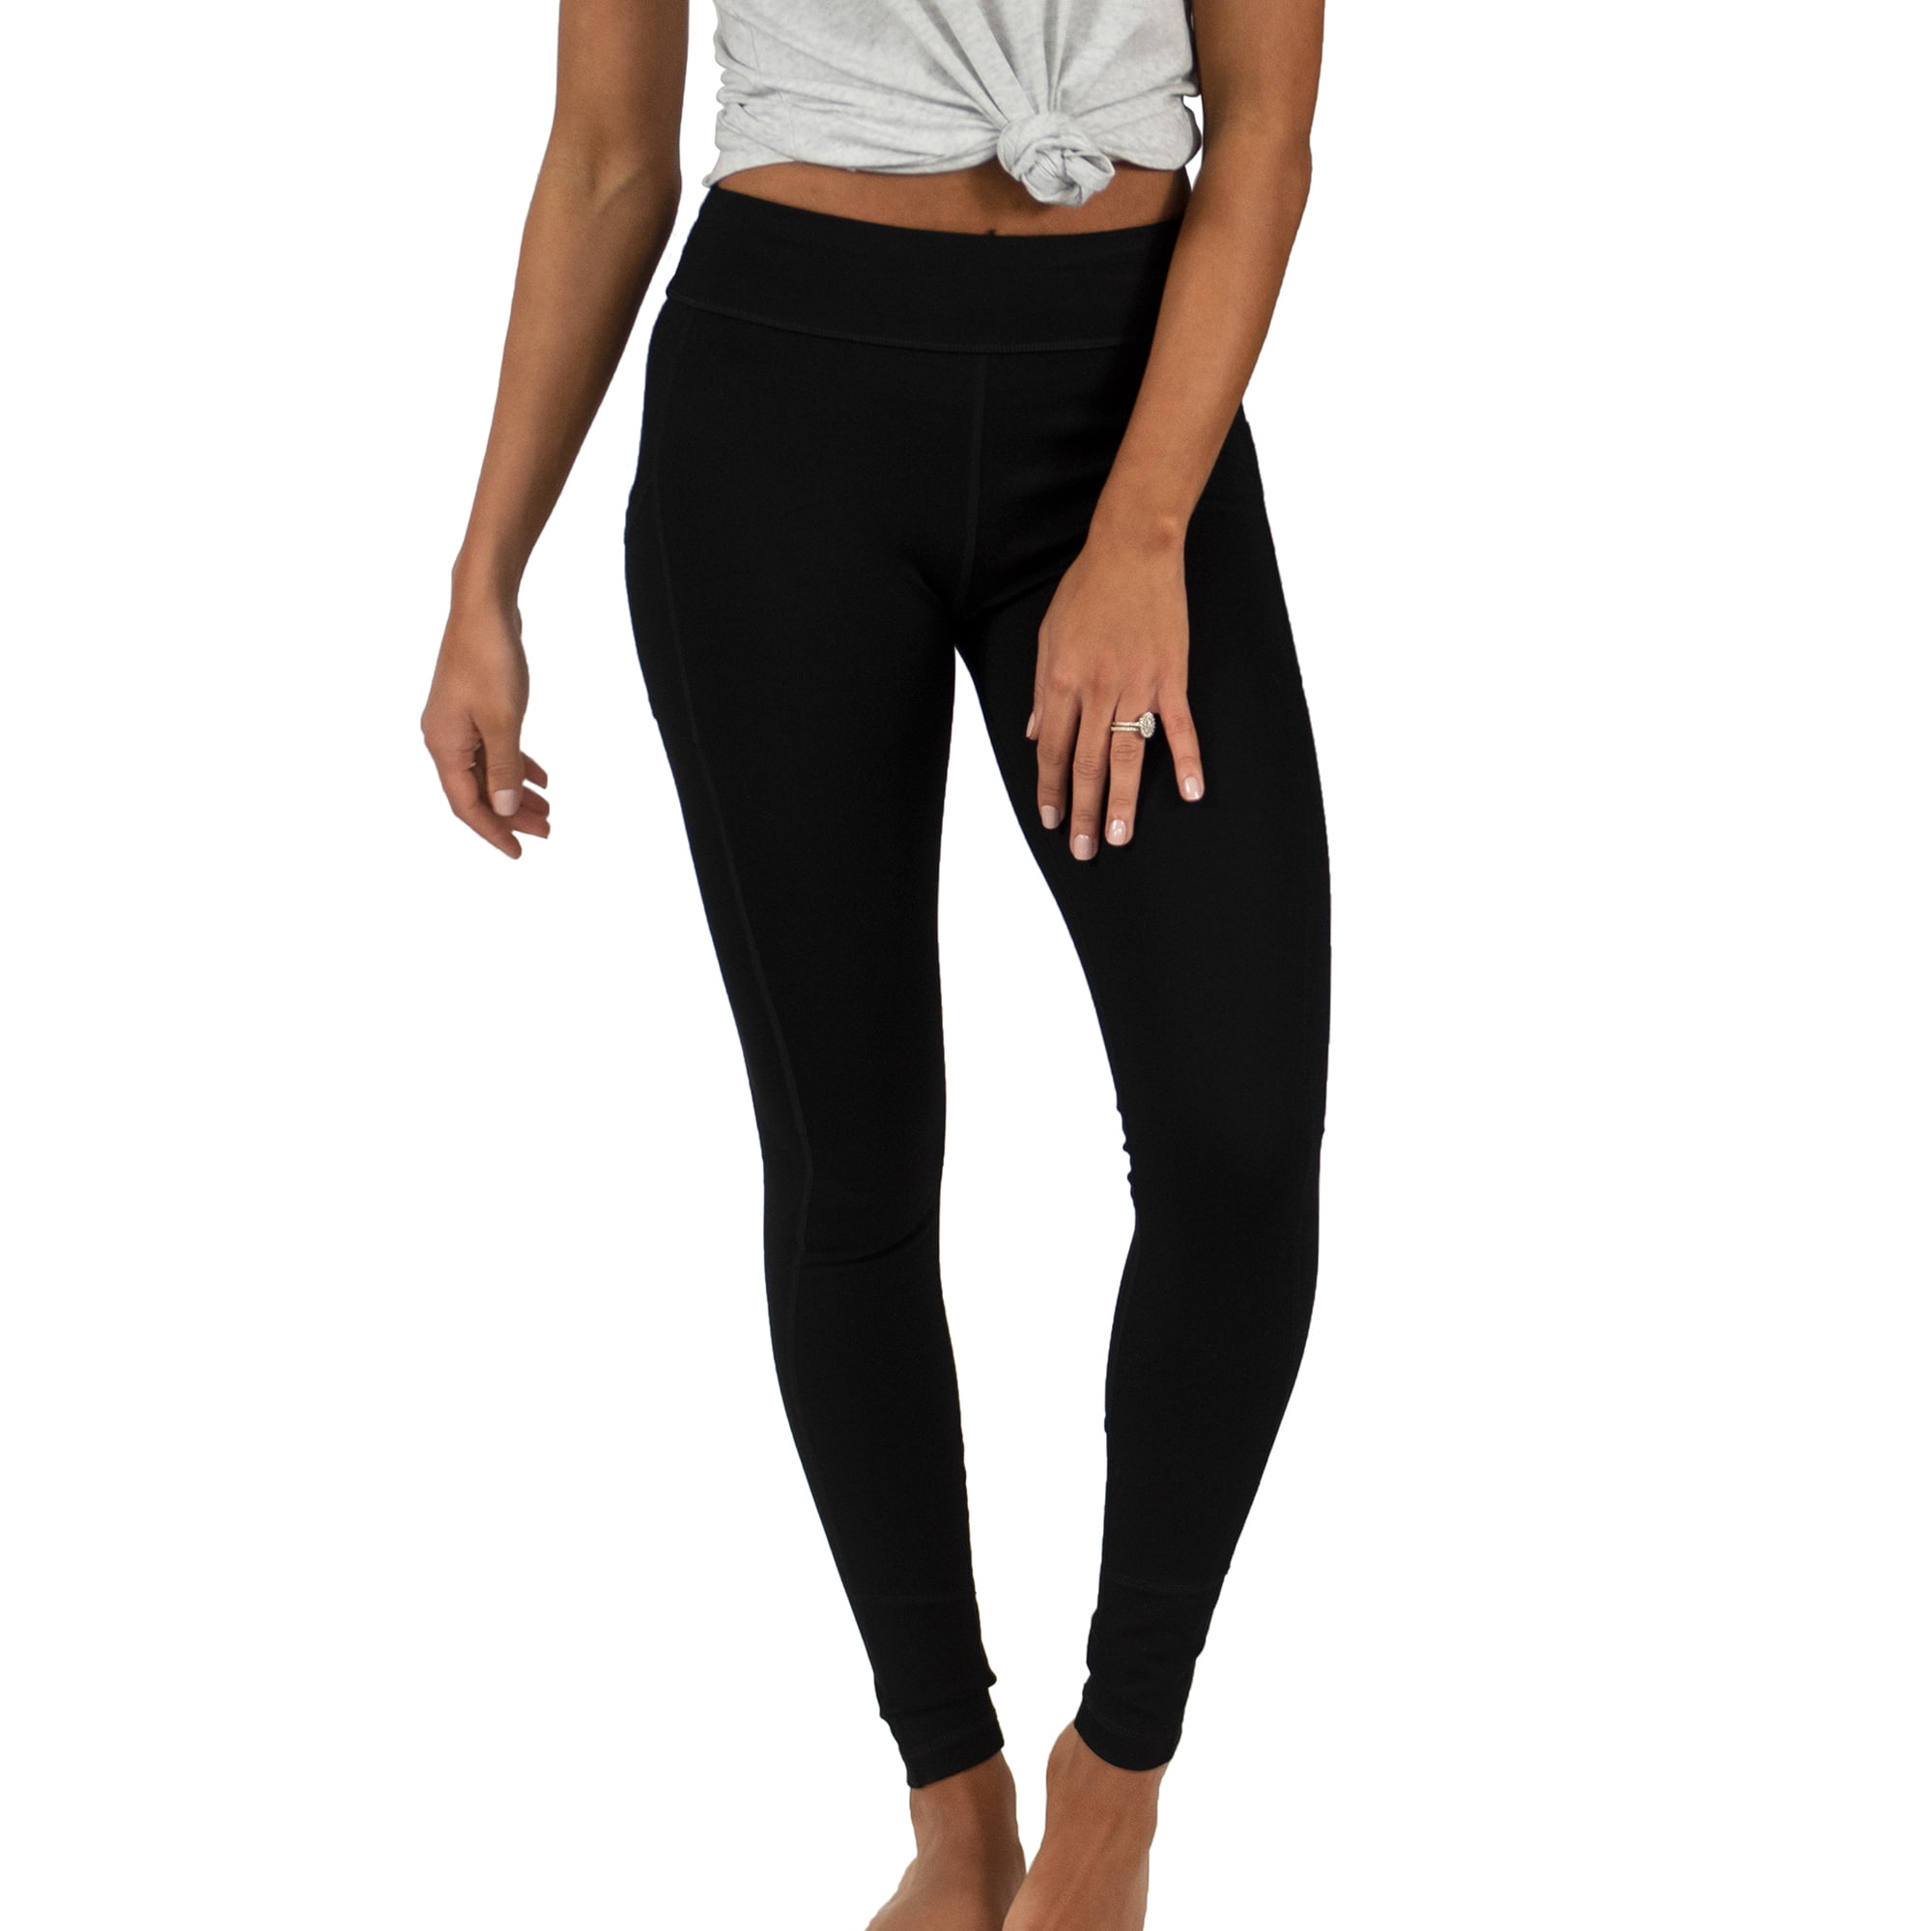 Cariloha Bamboo Pieced Athletic Cropped Legging - Provides The